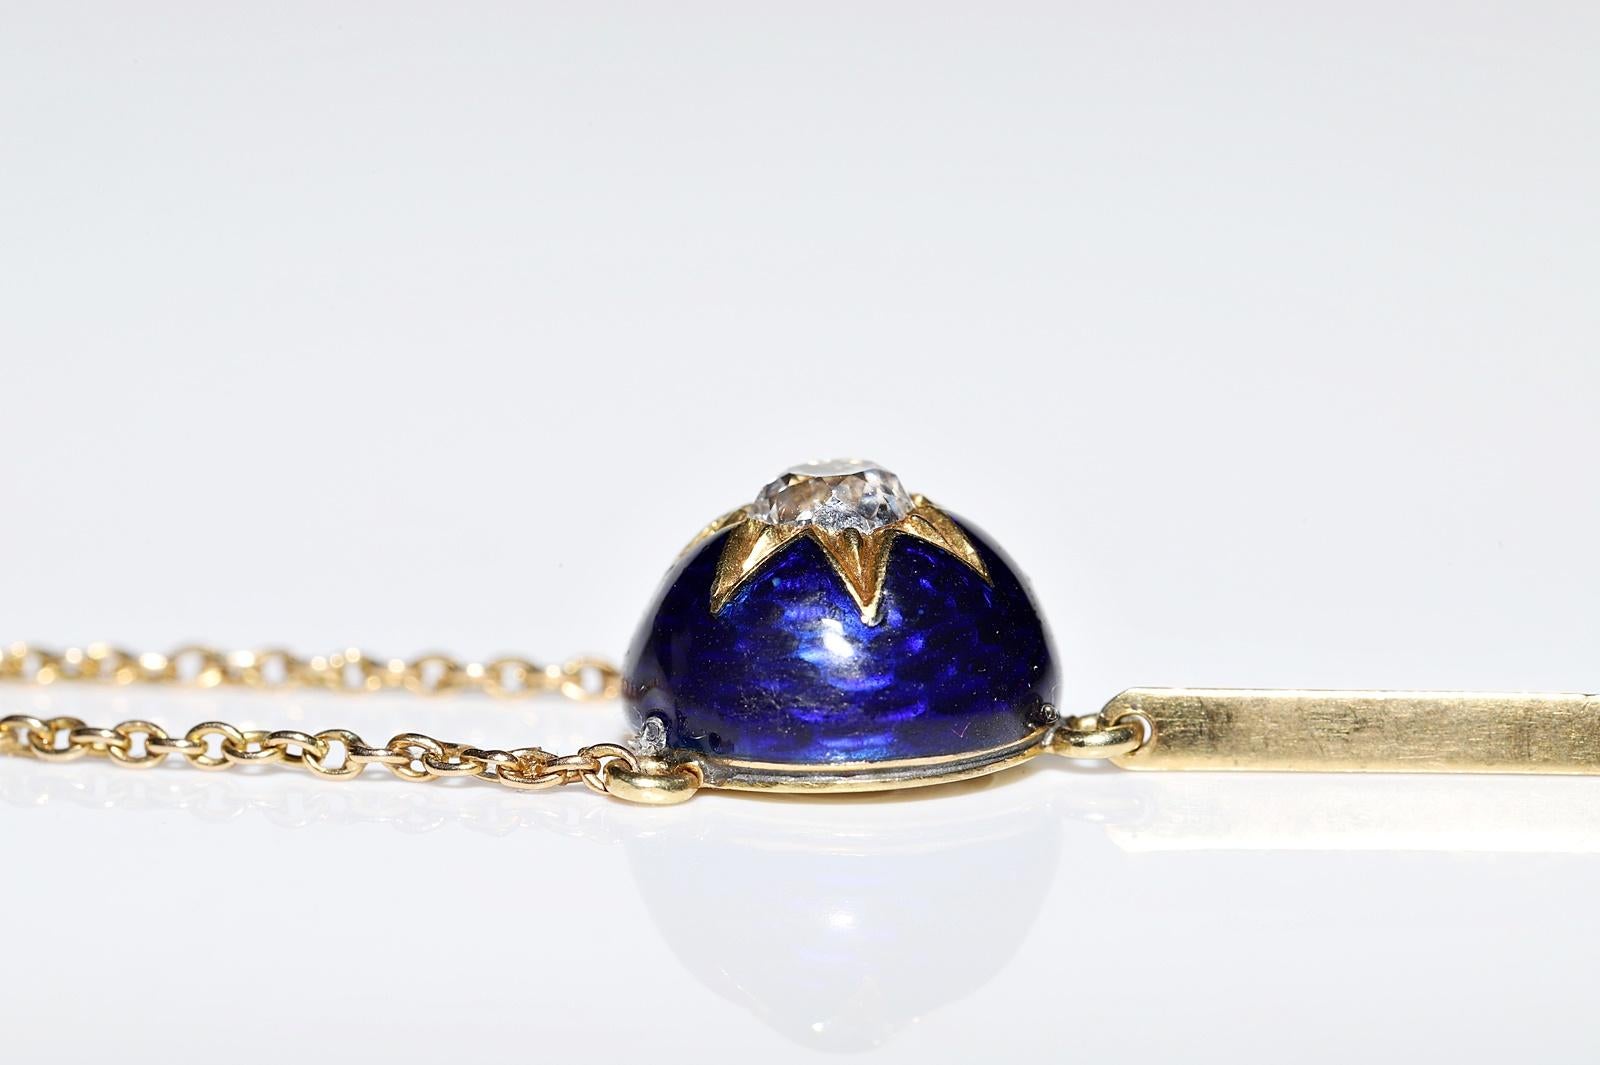 Antique 18K Gold Circa 1900s Natural Old Mine Cut Diamond And Enamel Necklace For Sale 2